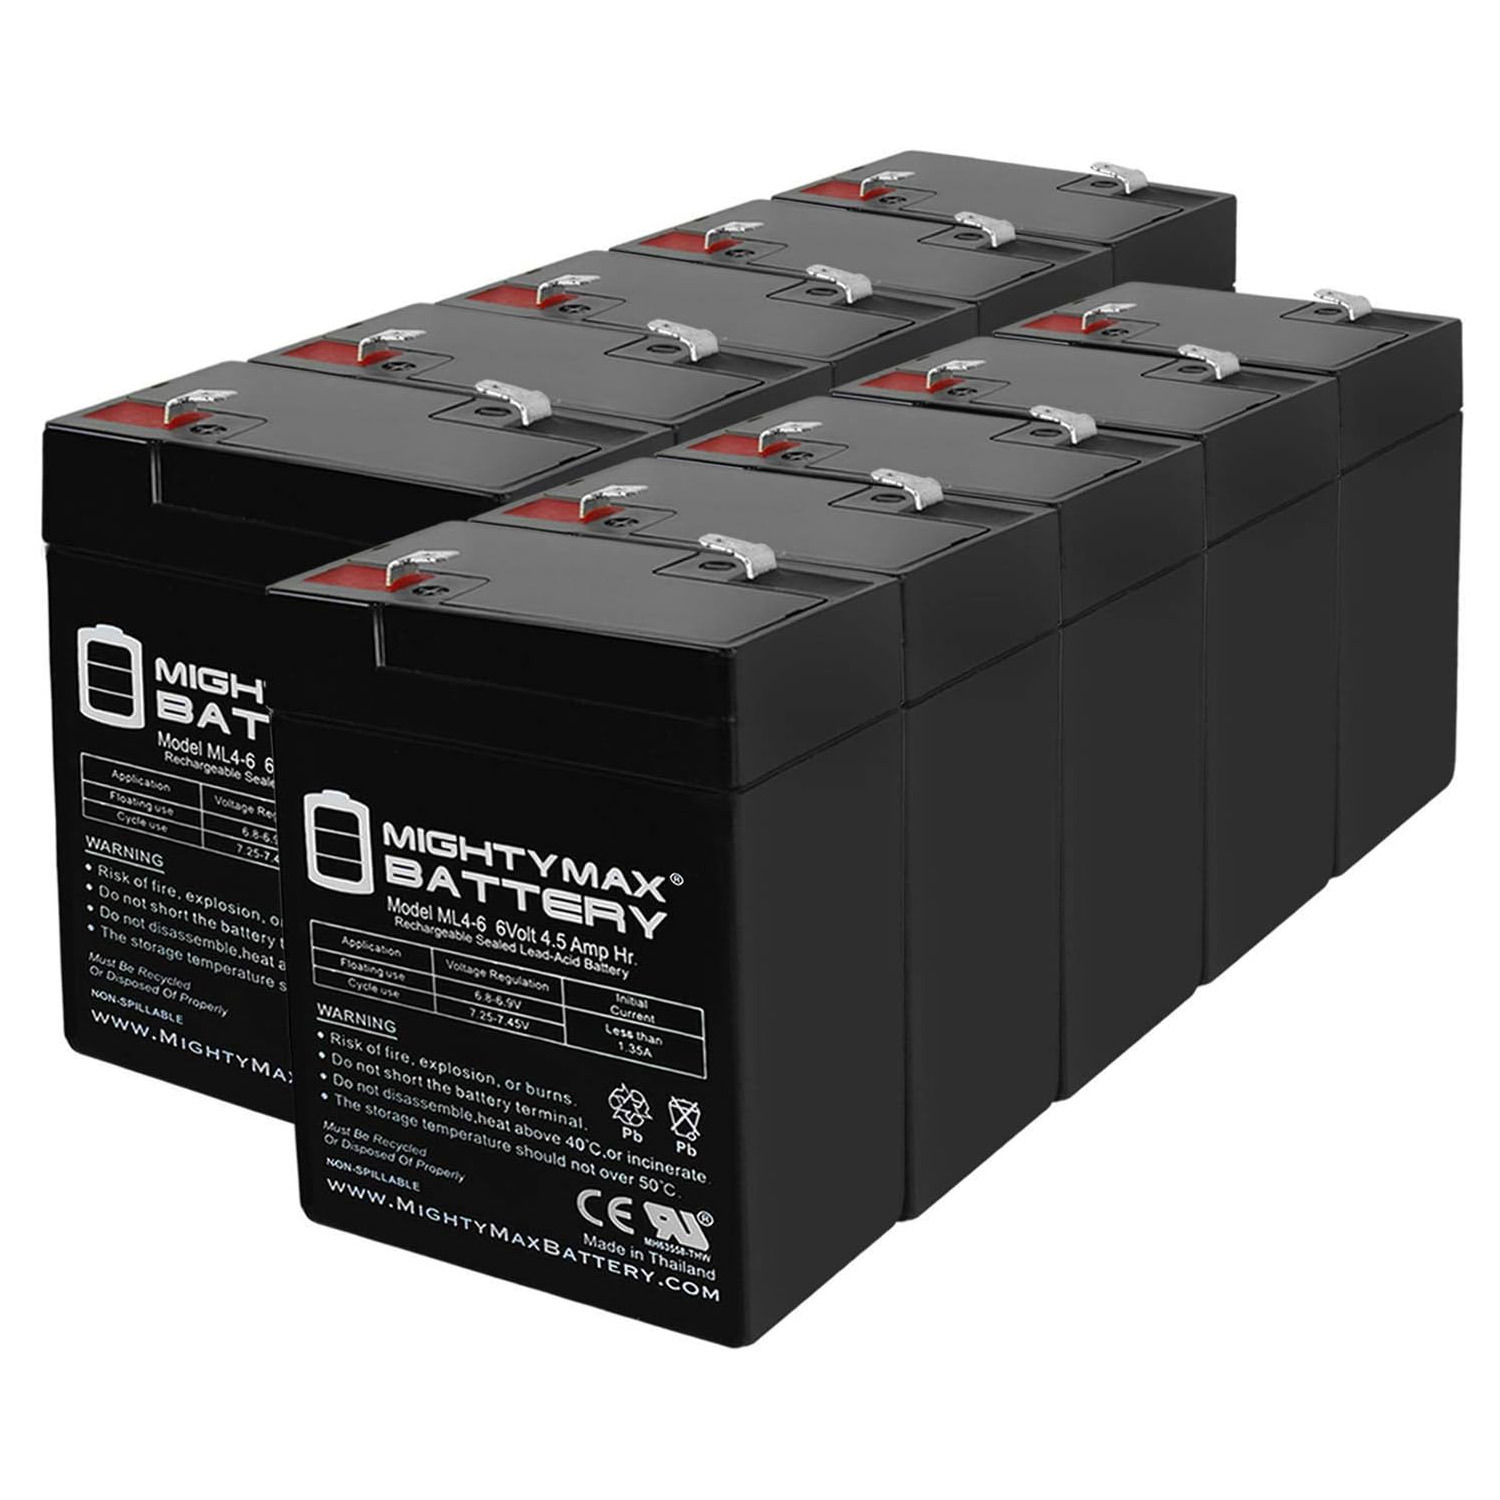 6V 4.5AH SLA Replacement Battery for Chloride 100-001-0224 - 10 Pack